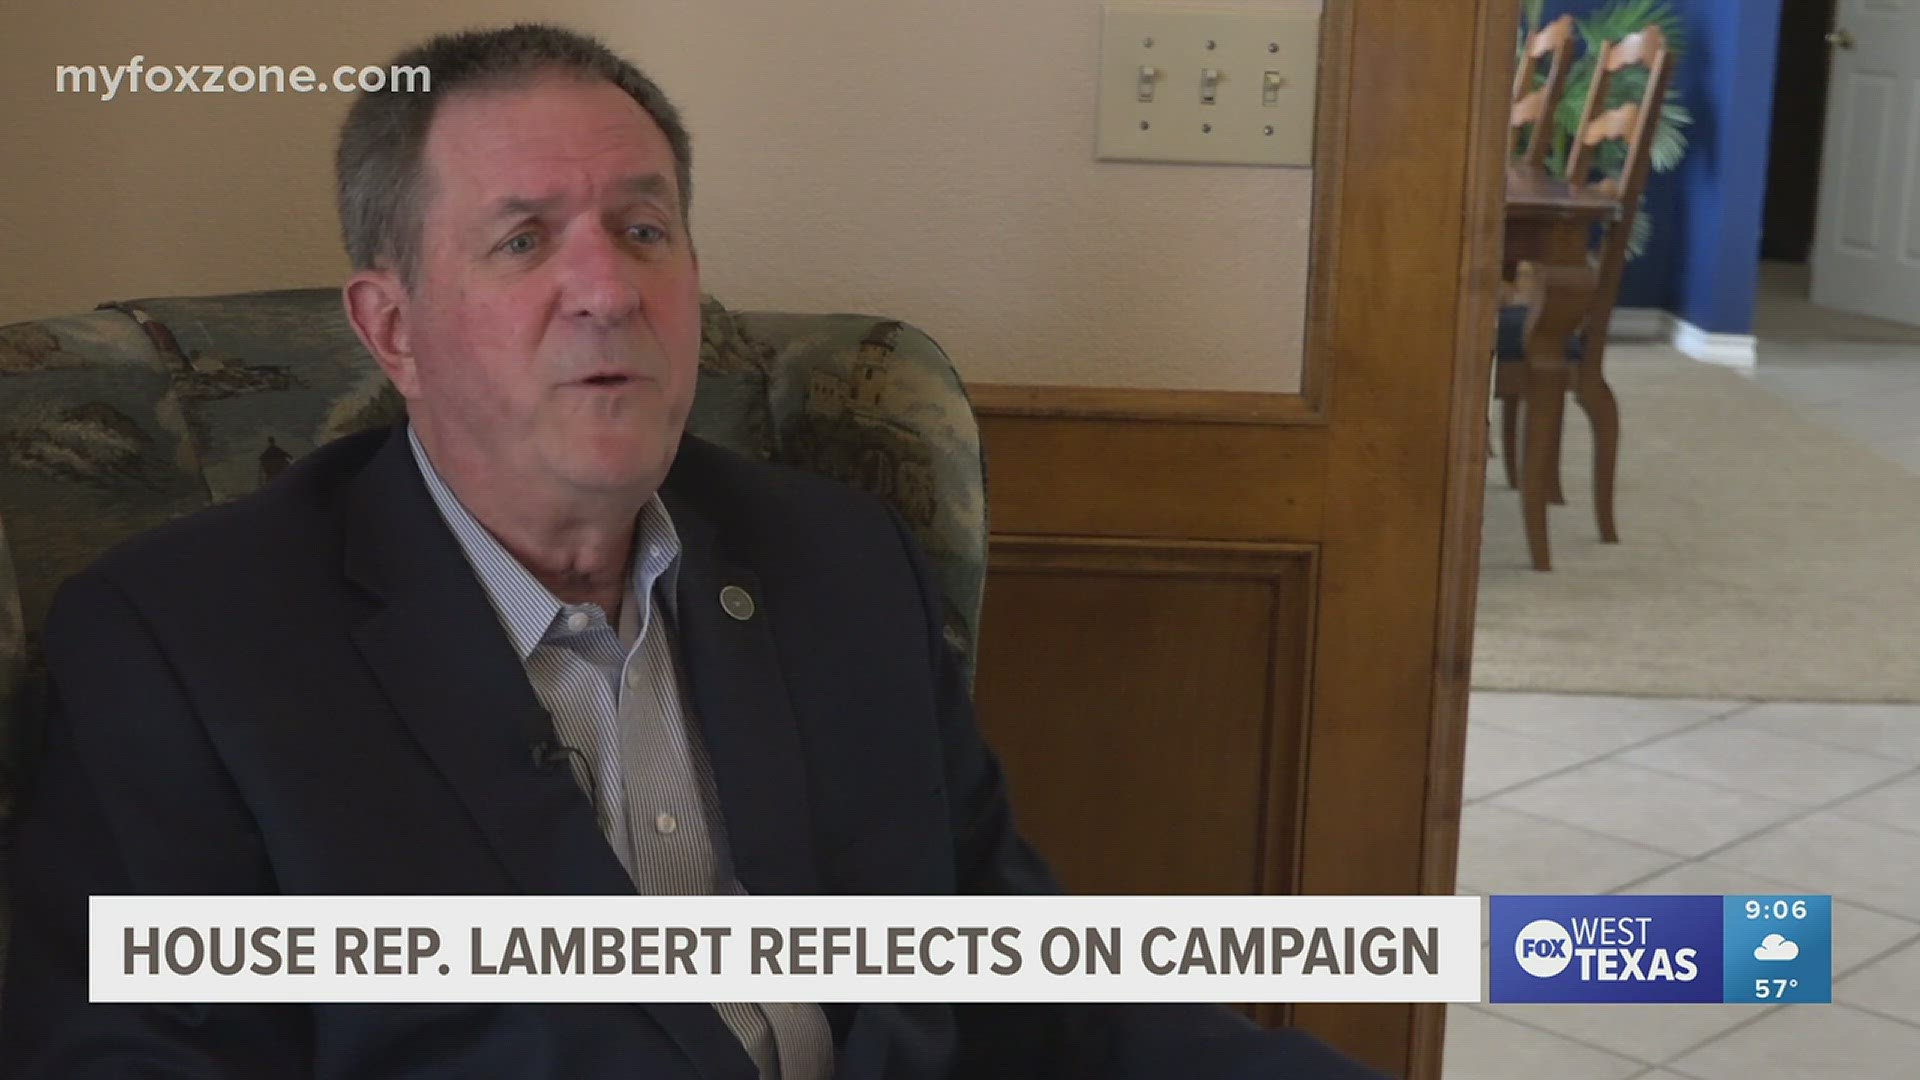 It was a tight race back on March 5th between Stan Lambert and Liz Case, but ultimately the incumbent came out on top.